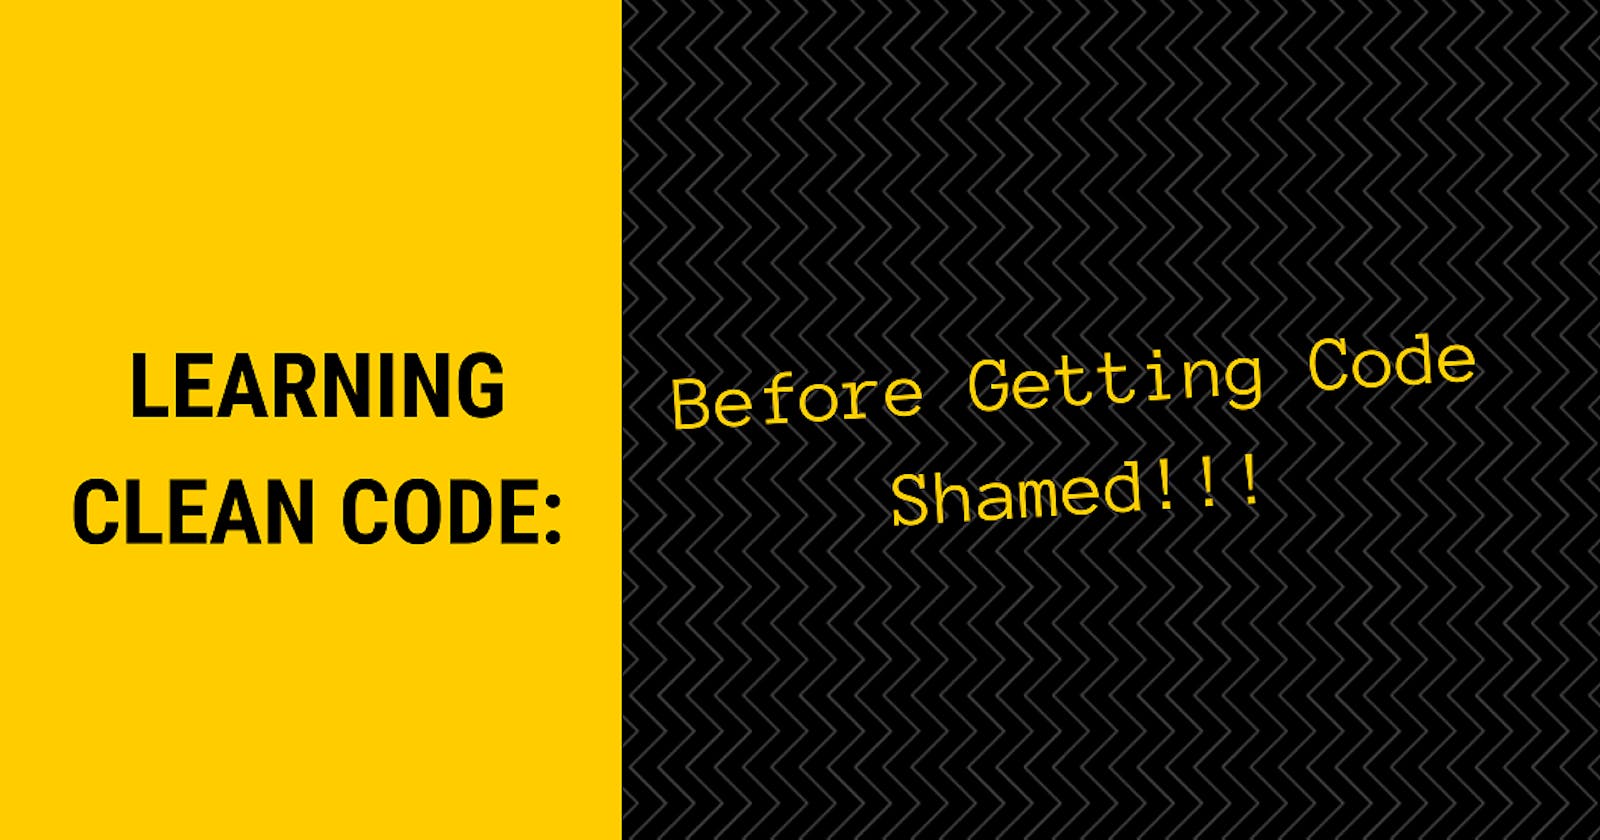 Learning Clean Code: Before Getting Code Shamed